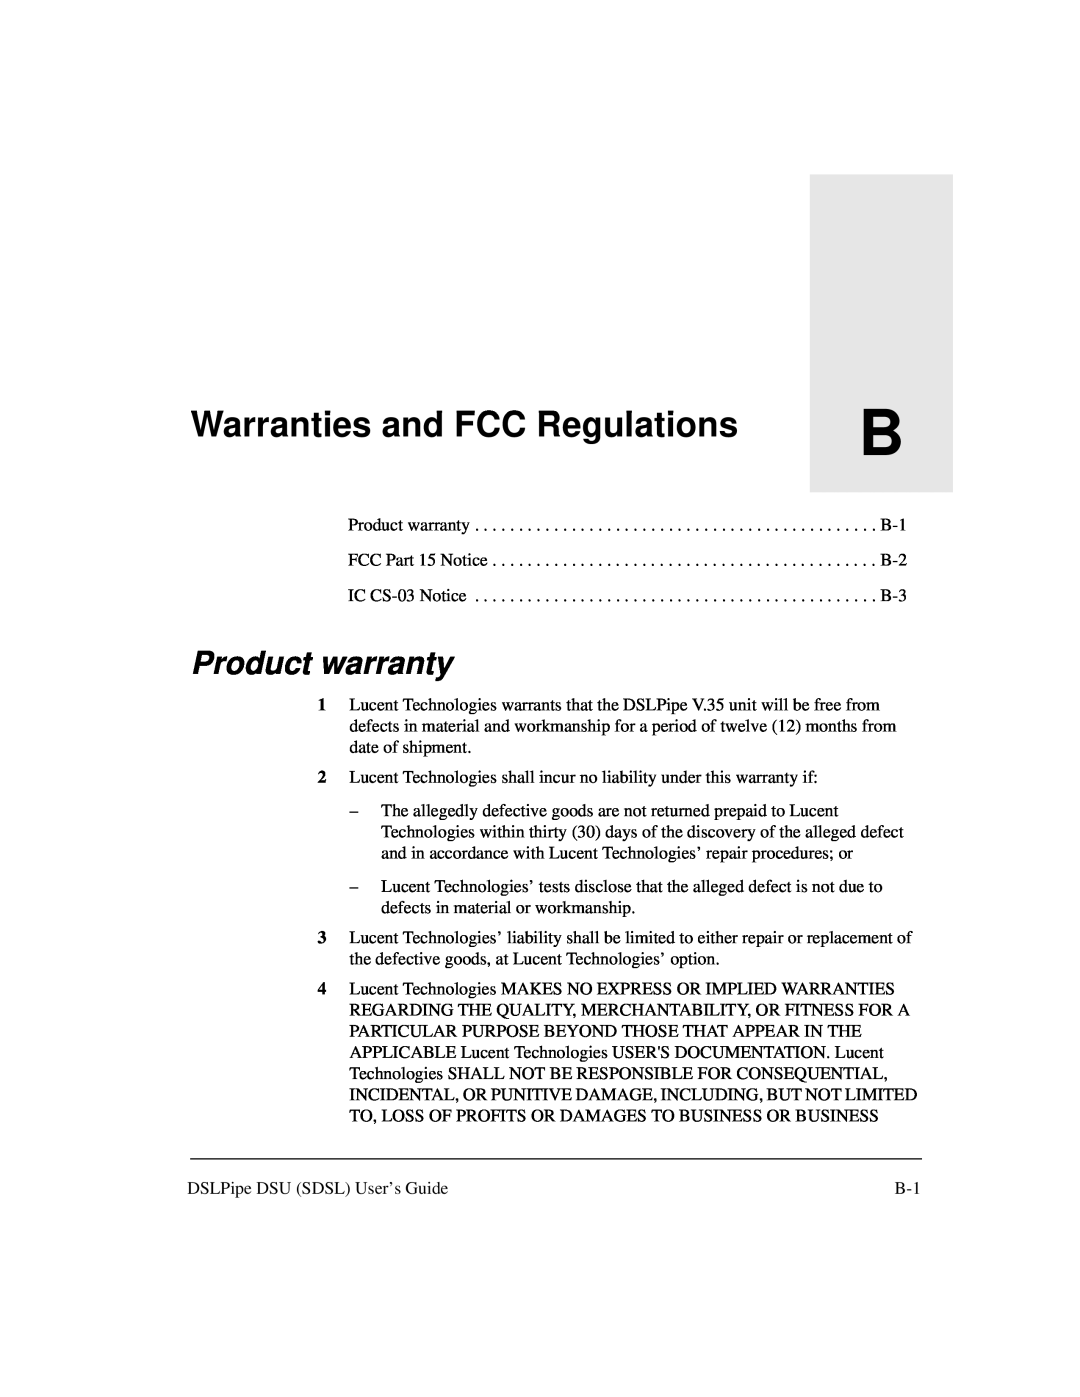 Lucent Technologies 7820-0657-001 manual Warranties and FCC Regulations, Product warranty 